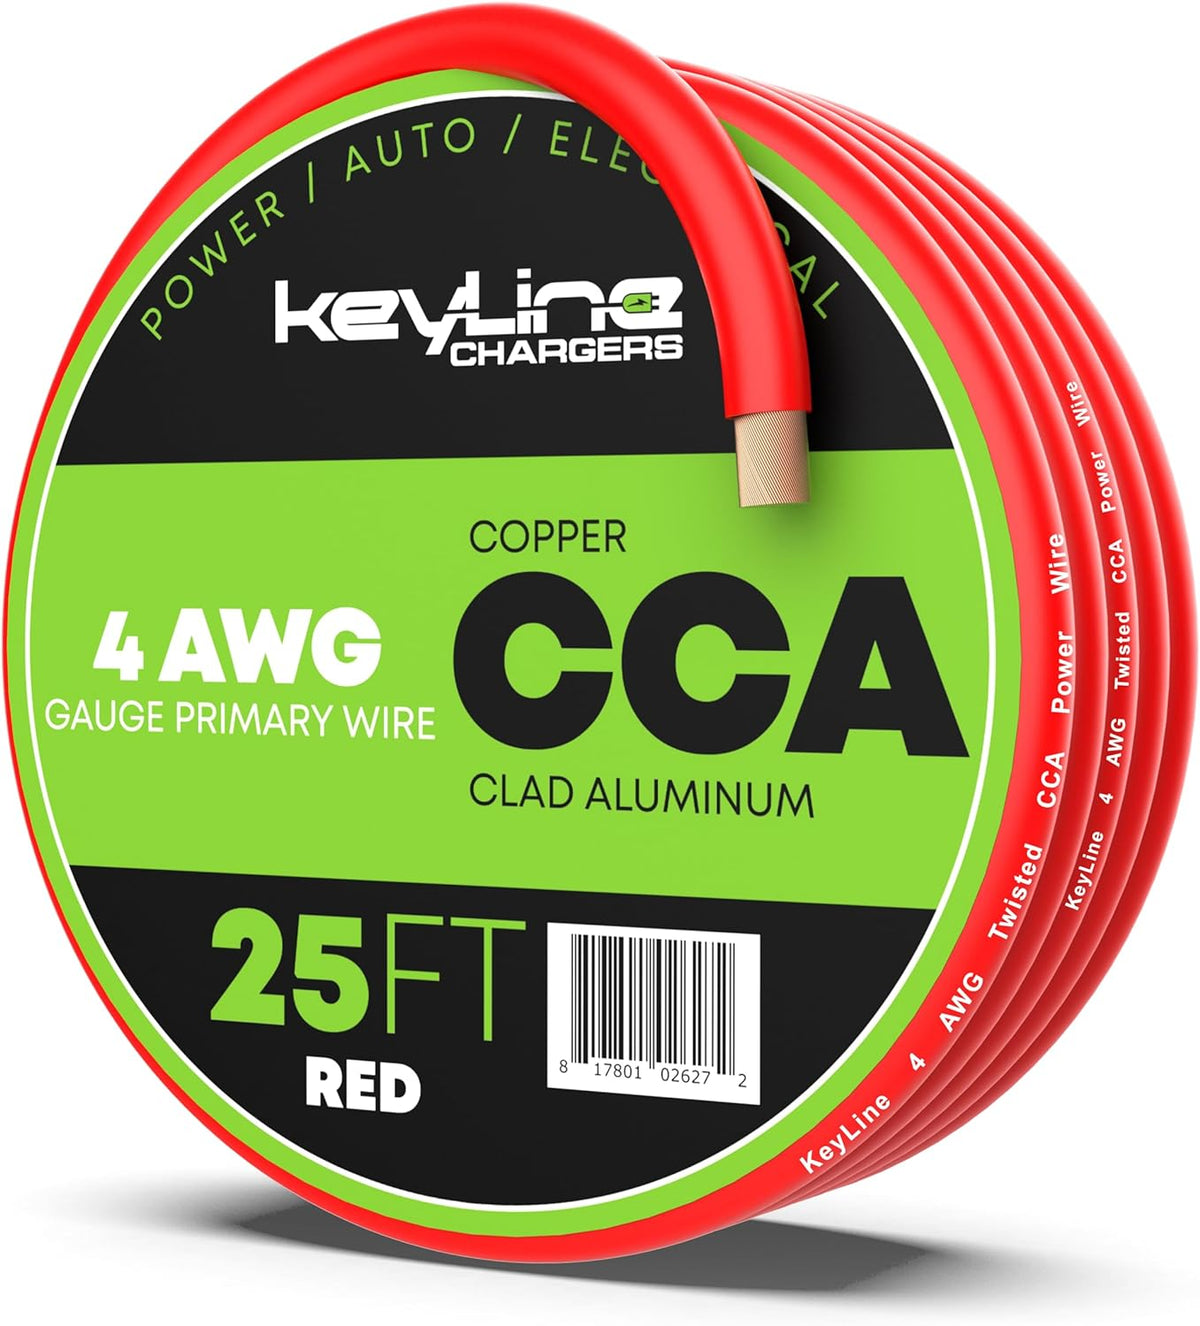 4 Gauge Wire - 25ft Red | 4 Gauge Amp Wire, Battery Cable, Marine Speaker Wire, Solar Cables for RV Trailer, Car Audio Speaker Cable, 4 AWG Automotive Wire Copper Clad Aluminum (CCA)